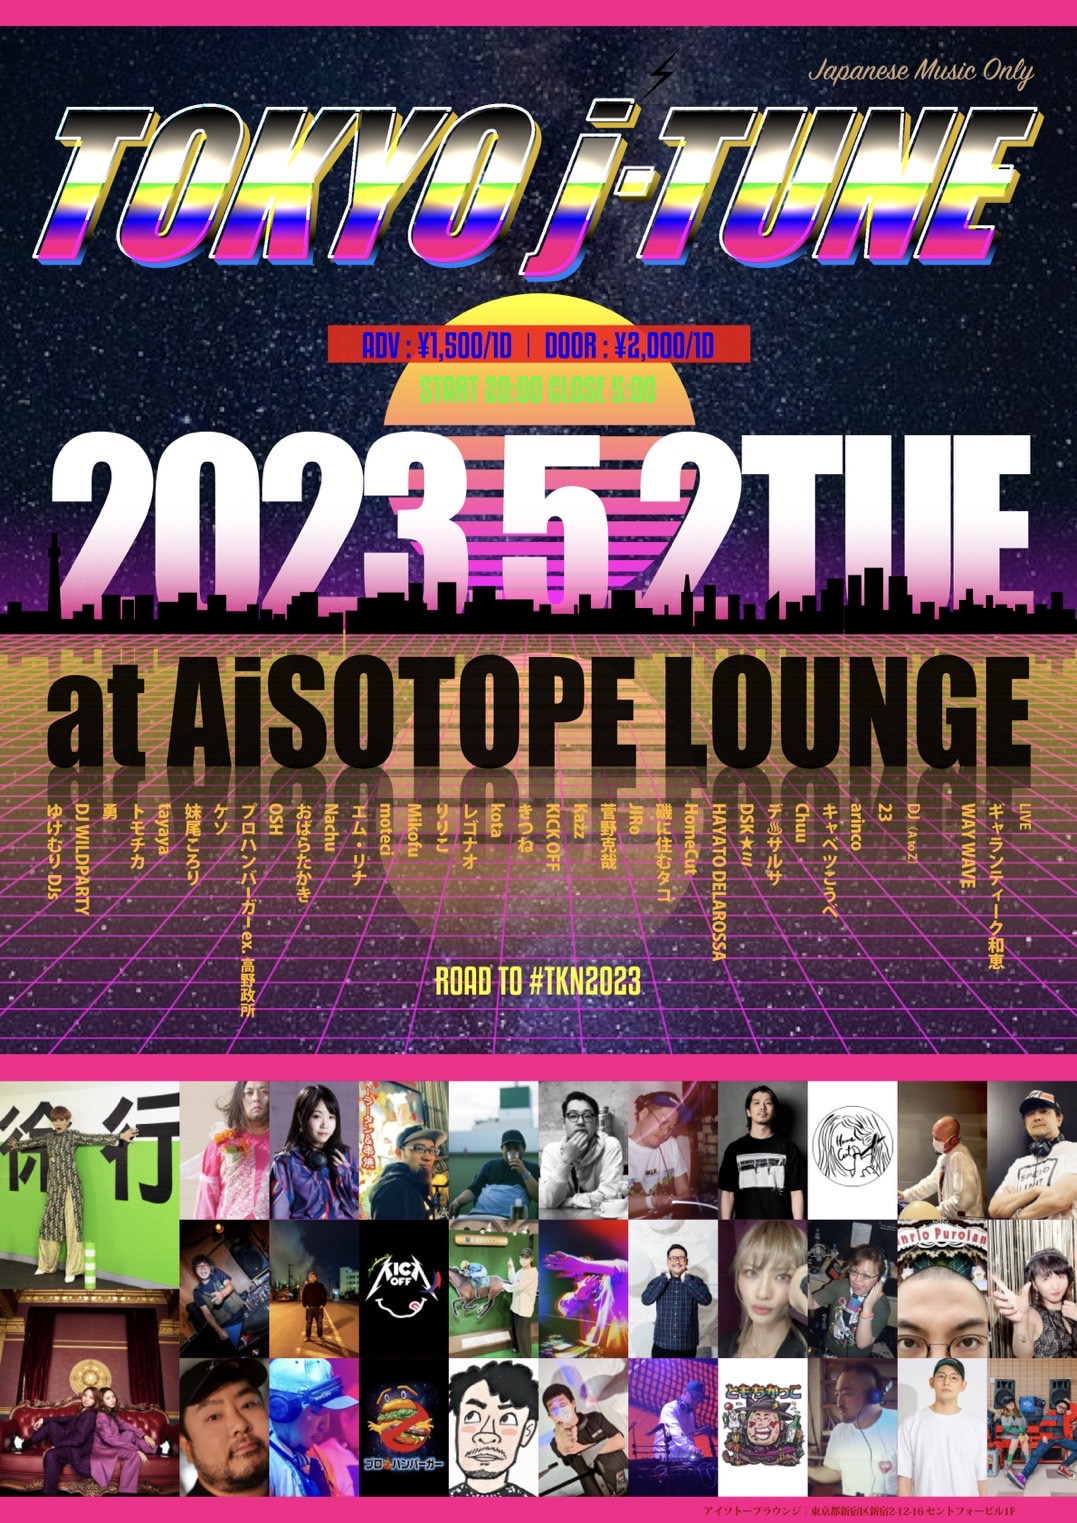 2023.5.2 TOKYO j-TUNE -Road to #tkn2023- @AiSOTOPE LOUNGE